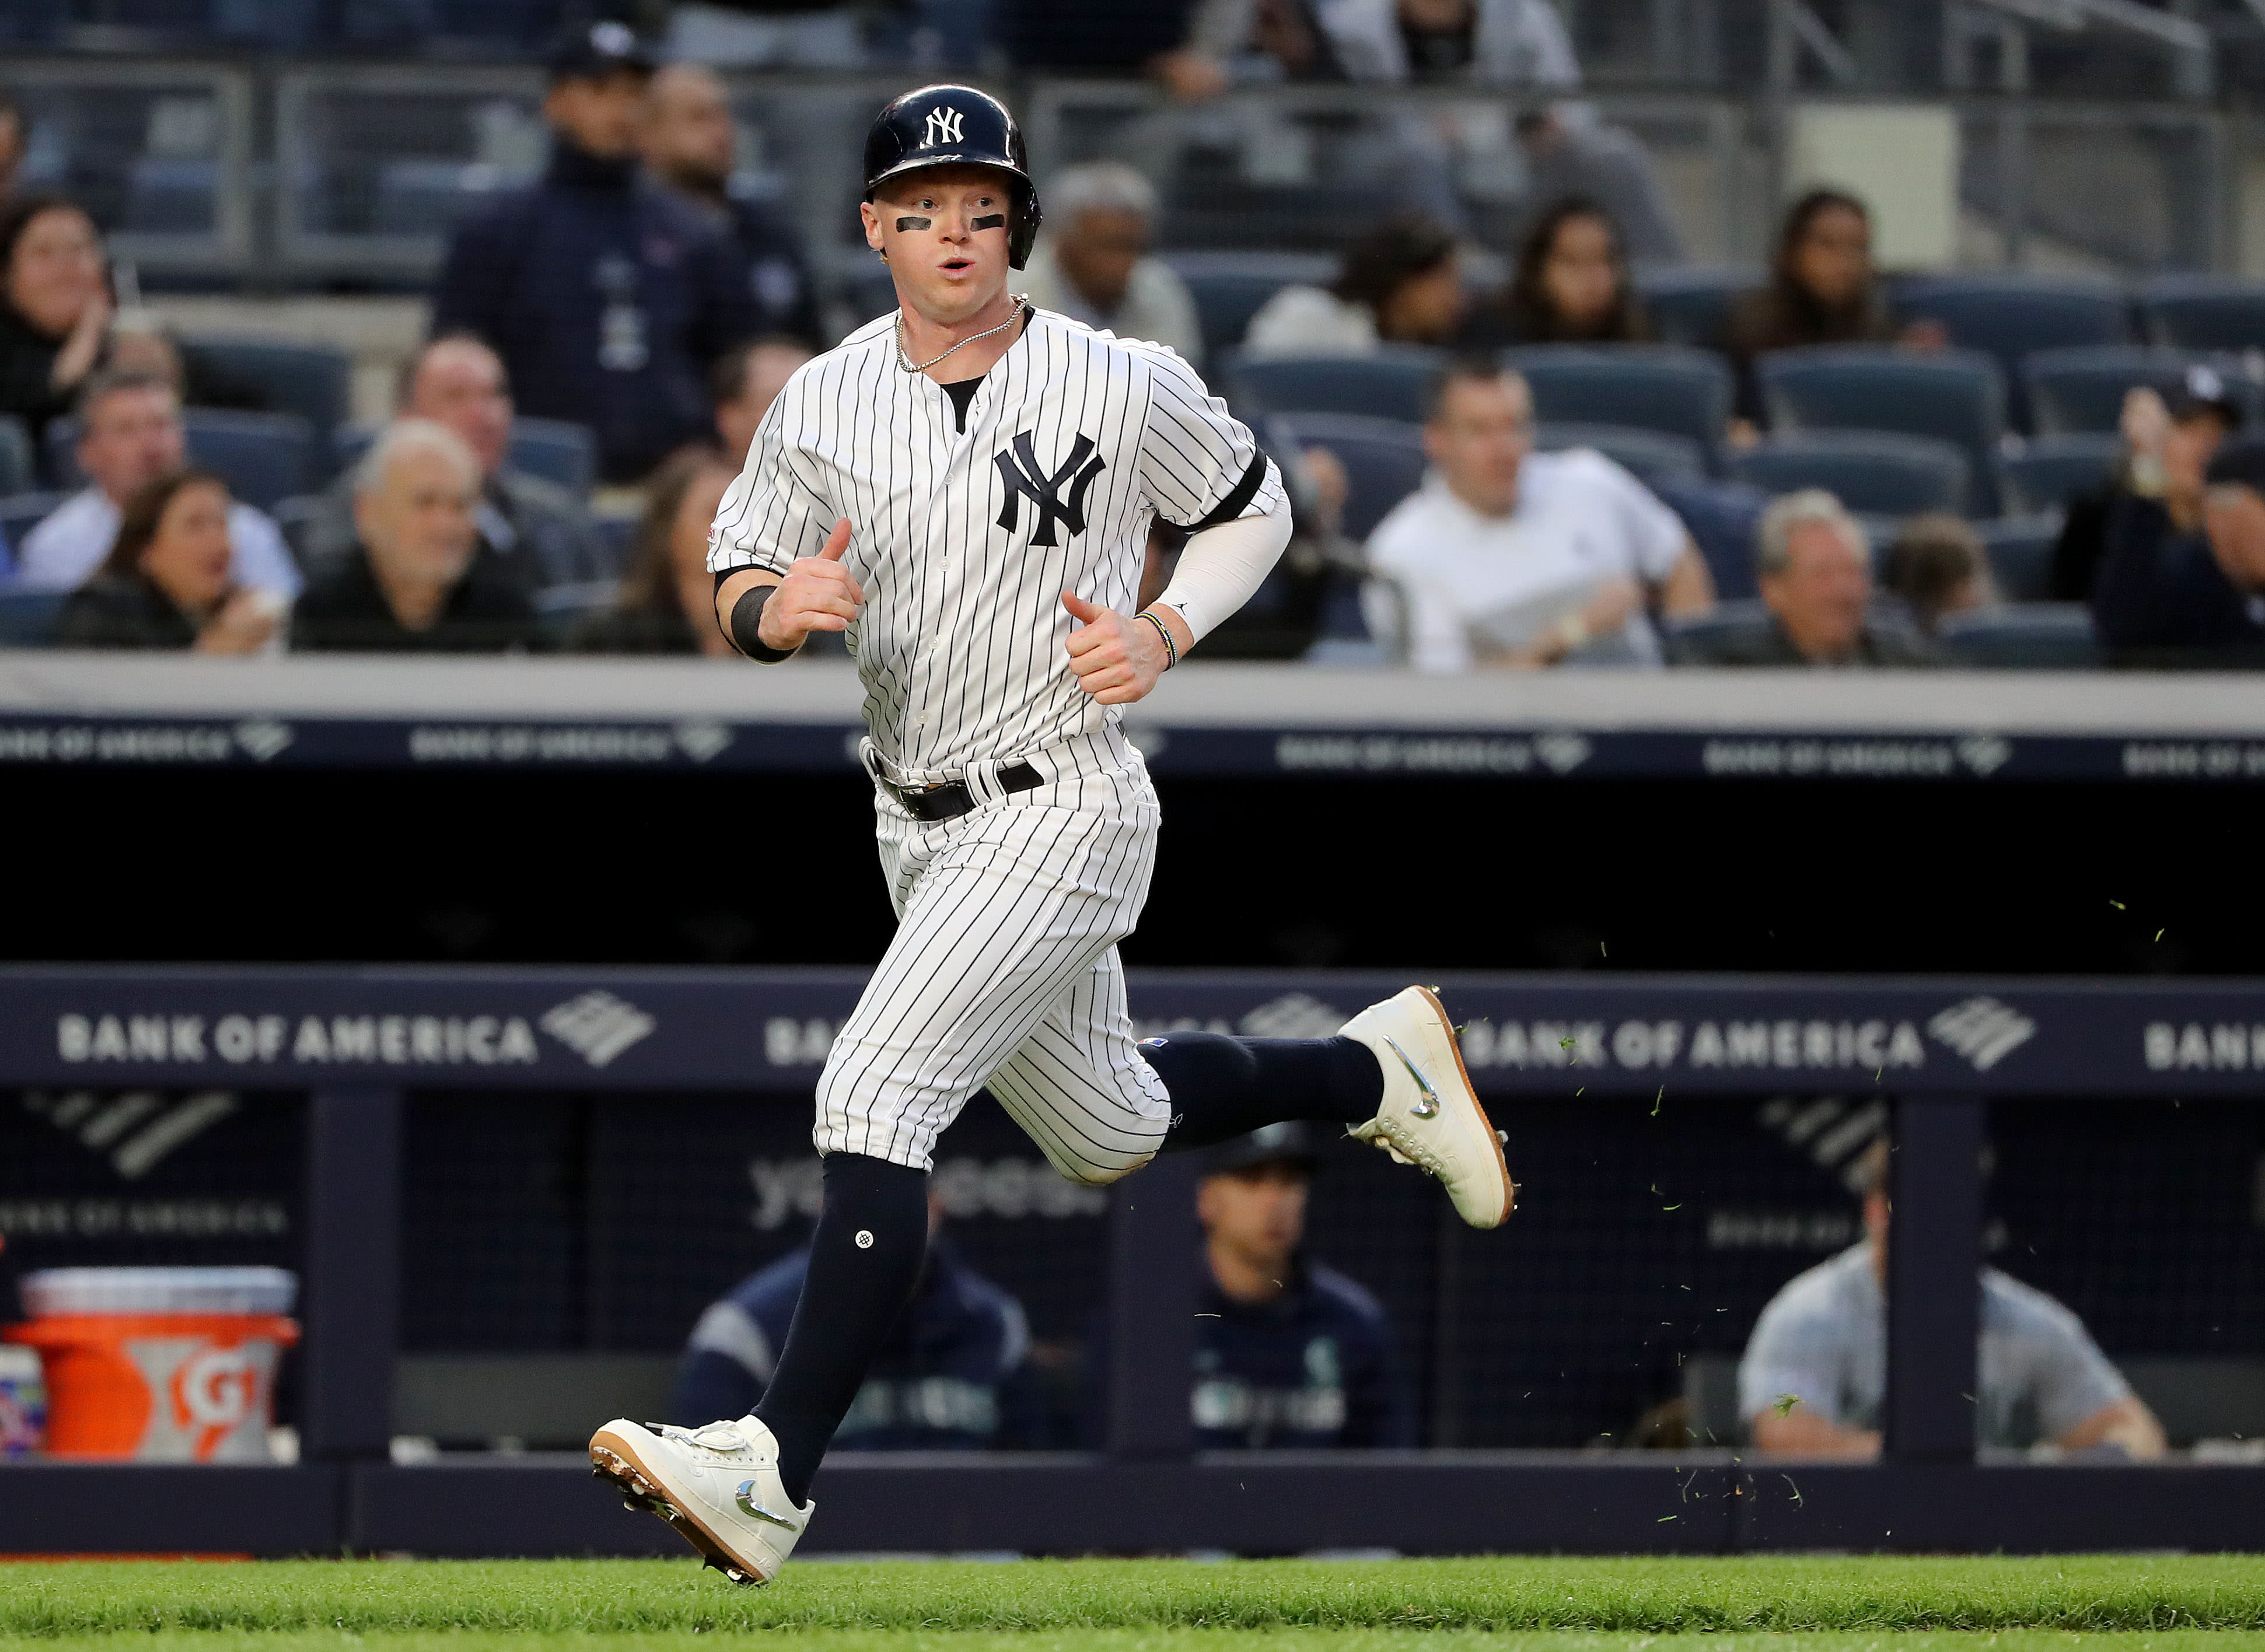 Clint Frazier Is Shaking Up the MLB By Turning His Sneakers Into Cleats